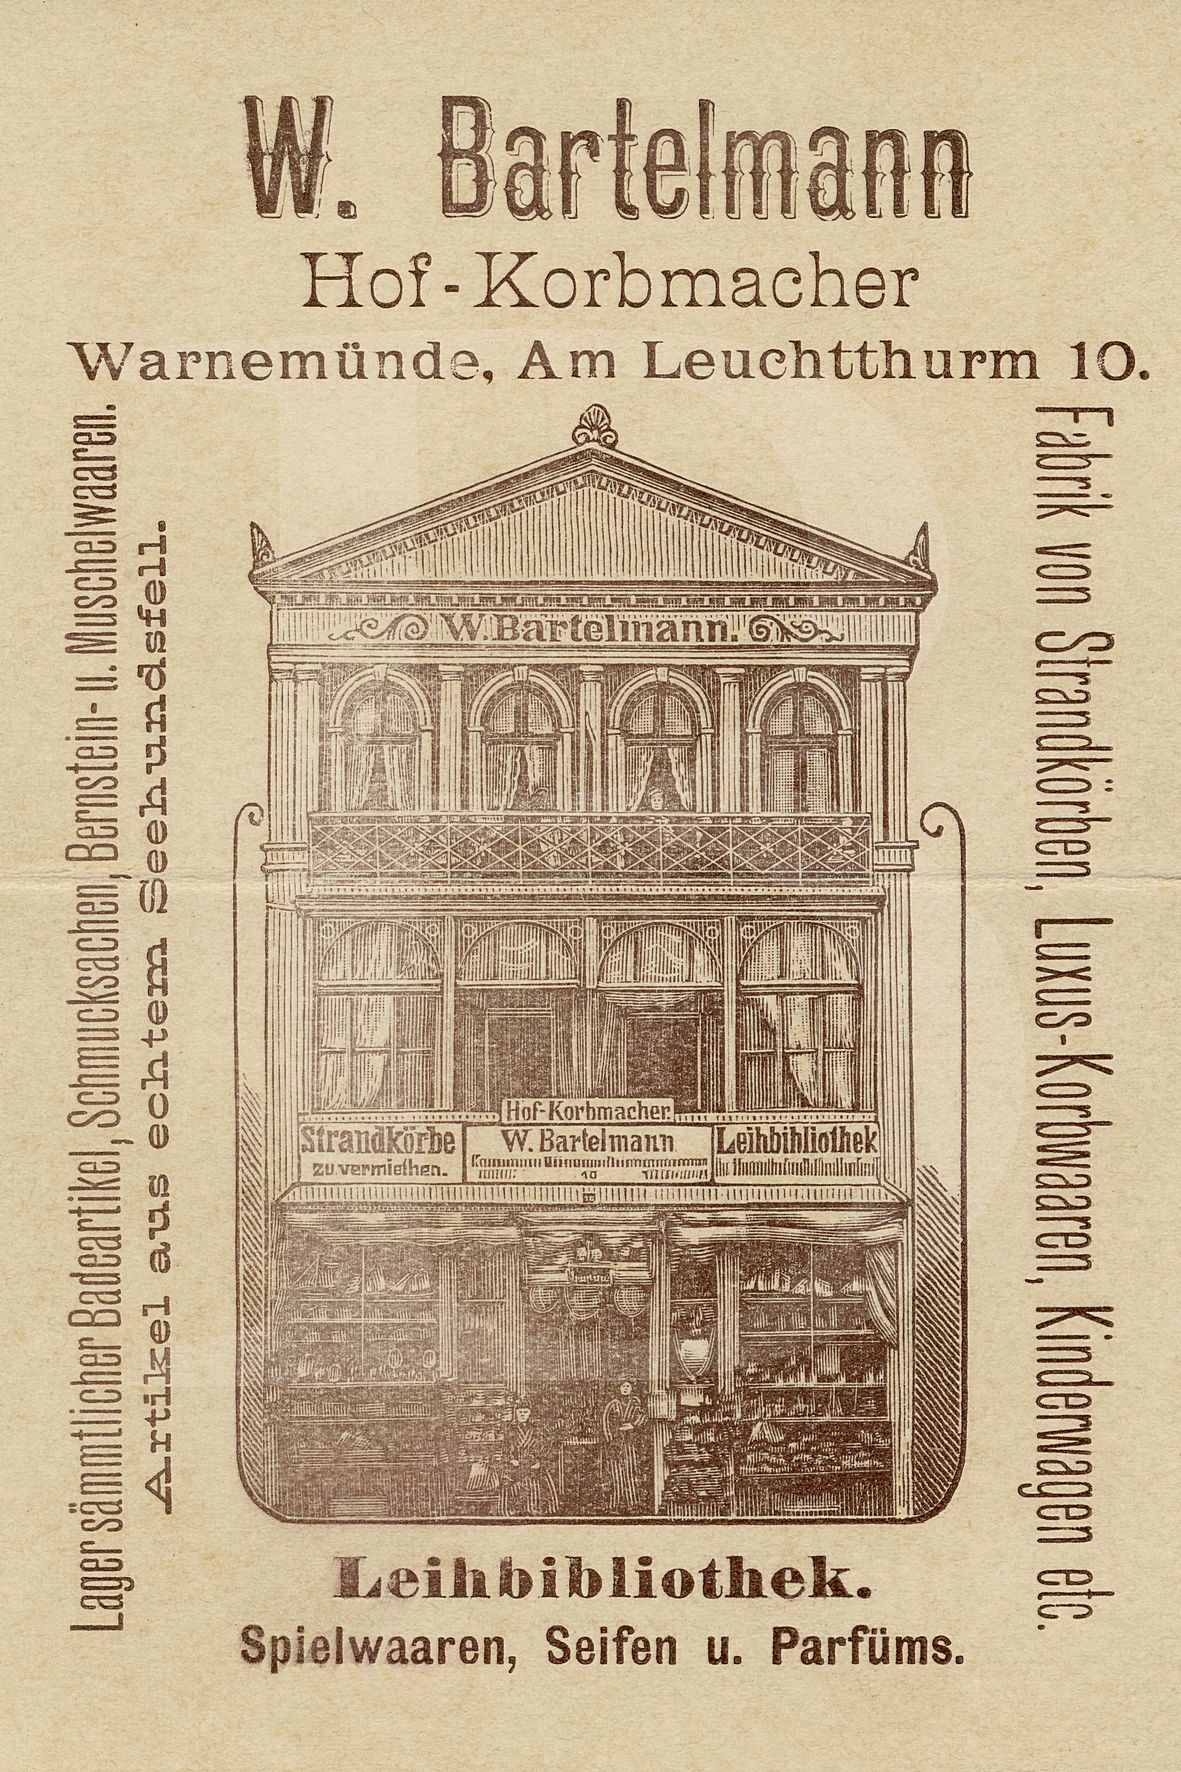 Advertisement featuring German text and a drawing of the workshop and store for Bartelmann’s strandkorb business. Image courtesy of Bartelmann.com.